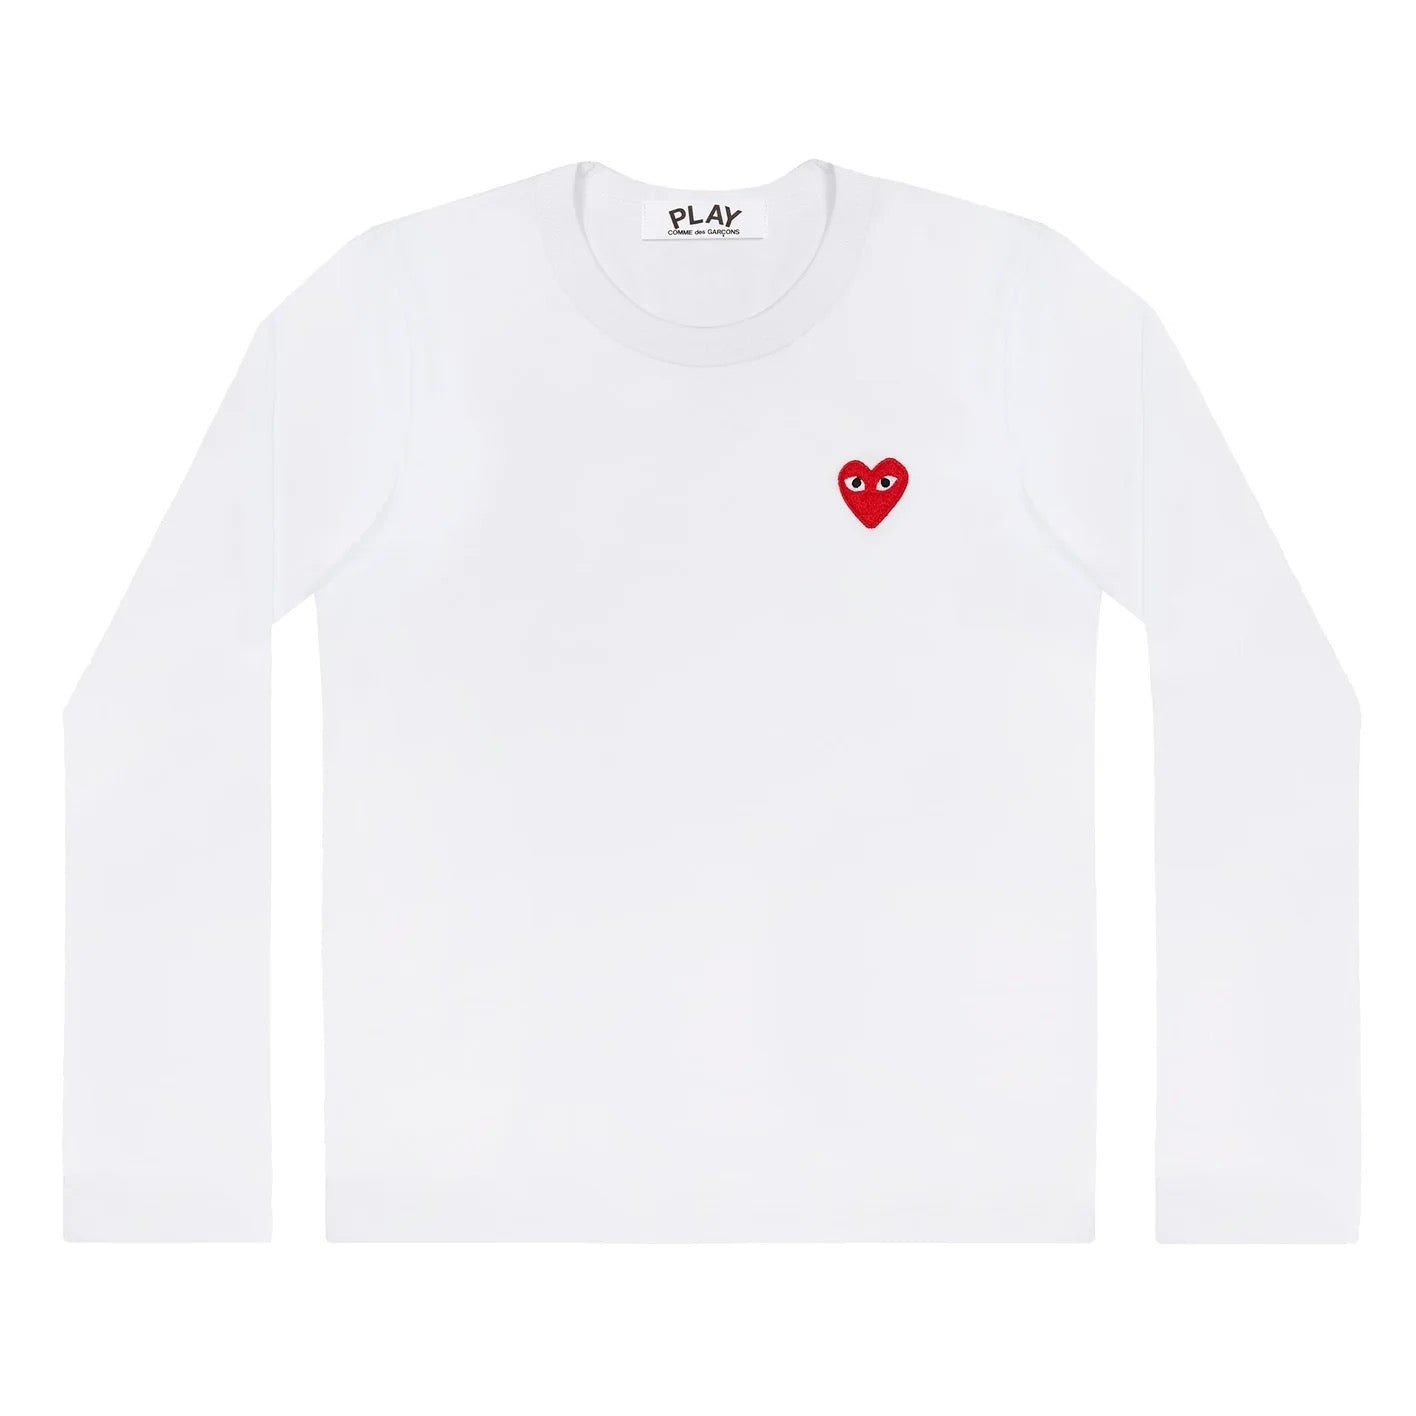 Comme Des Garcons Play男款长袖TEE 白色红心M